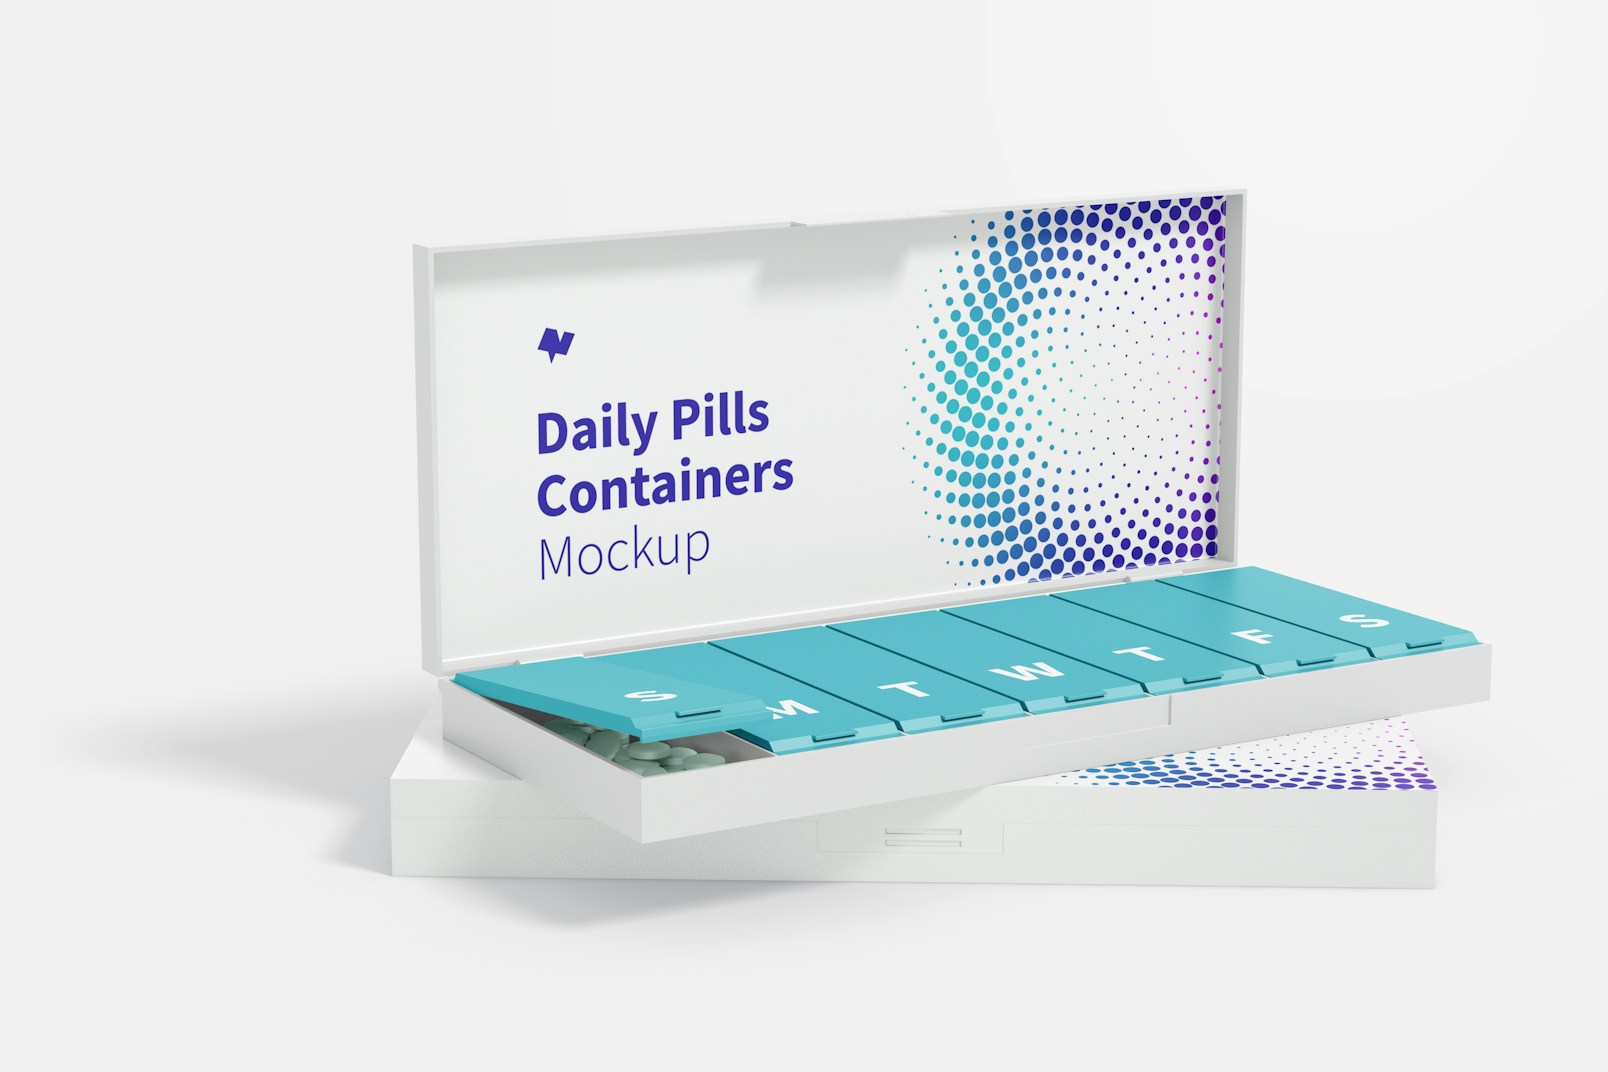 Daily Pills Containers Mockup, Perspective